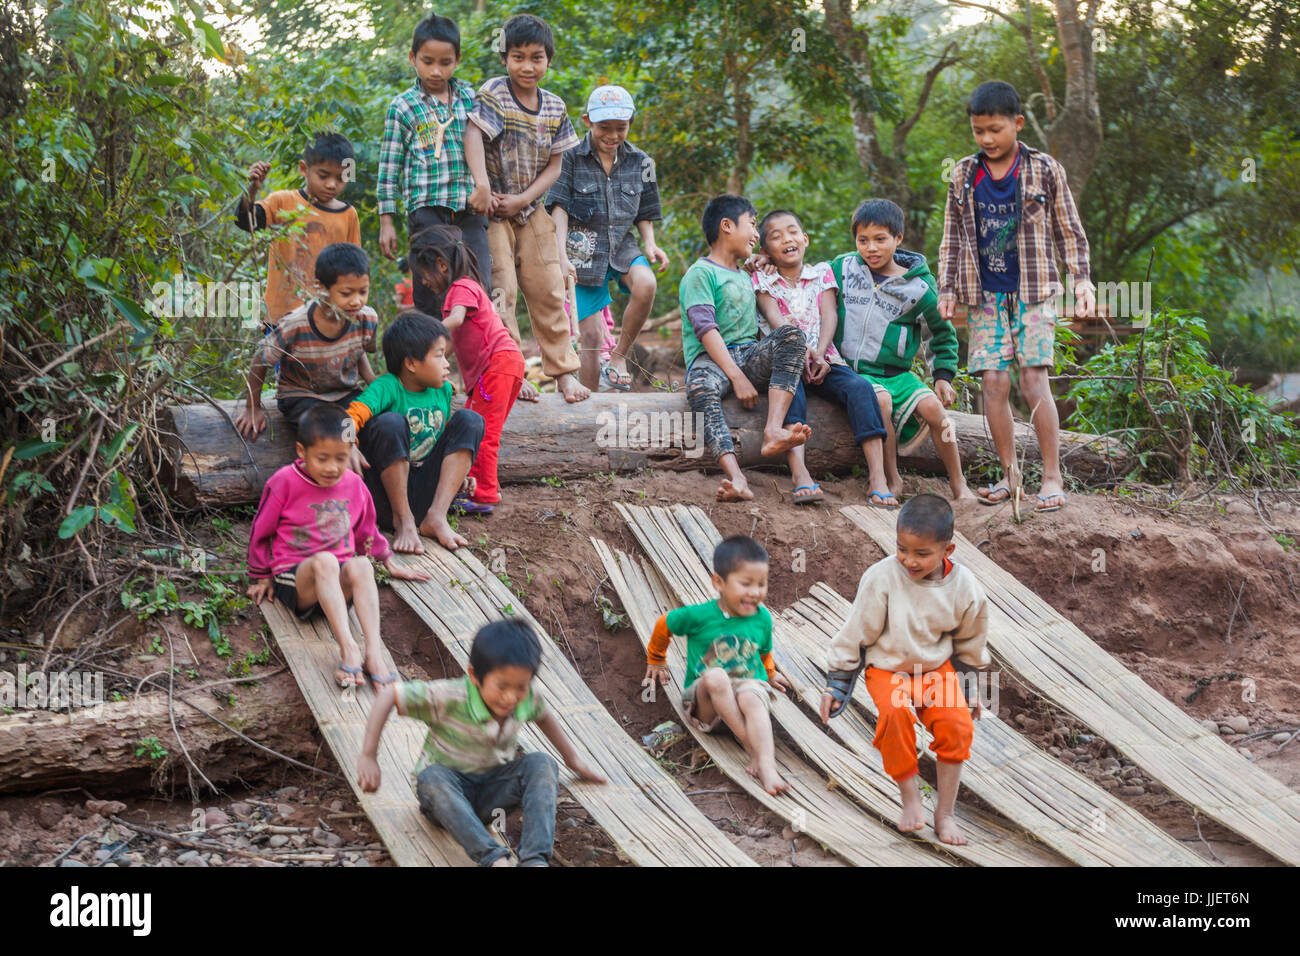 Children play and slide down split bamboo mats on the beach in Muang Hat Hin, Laos. Stock Photo